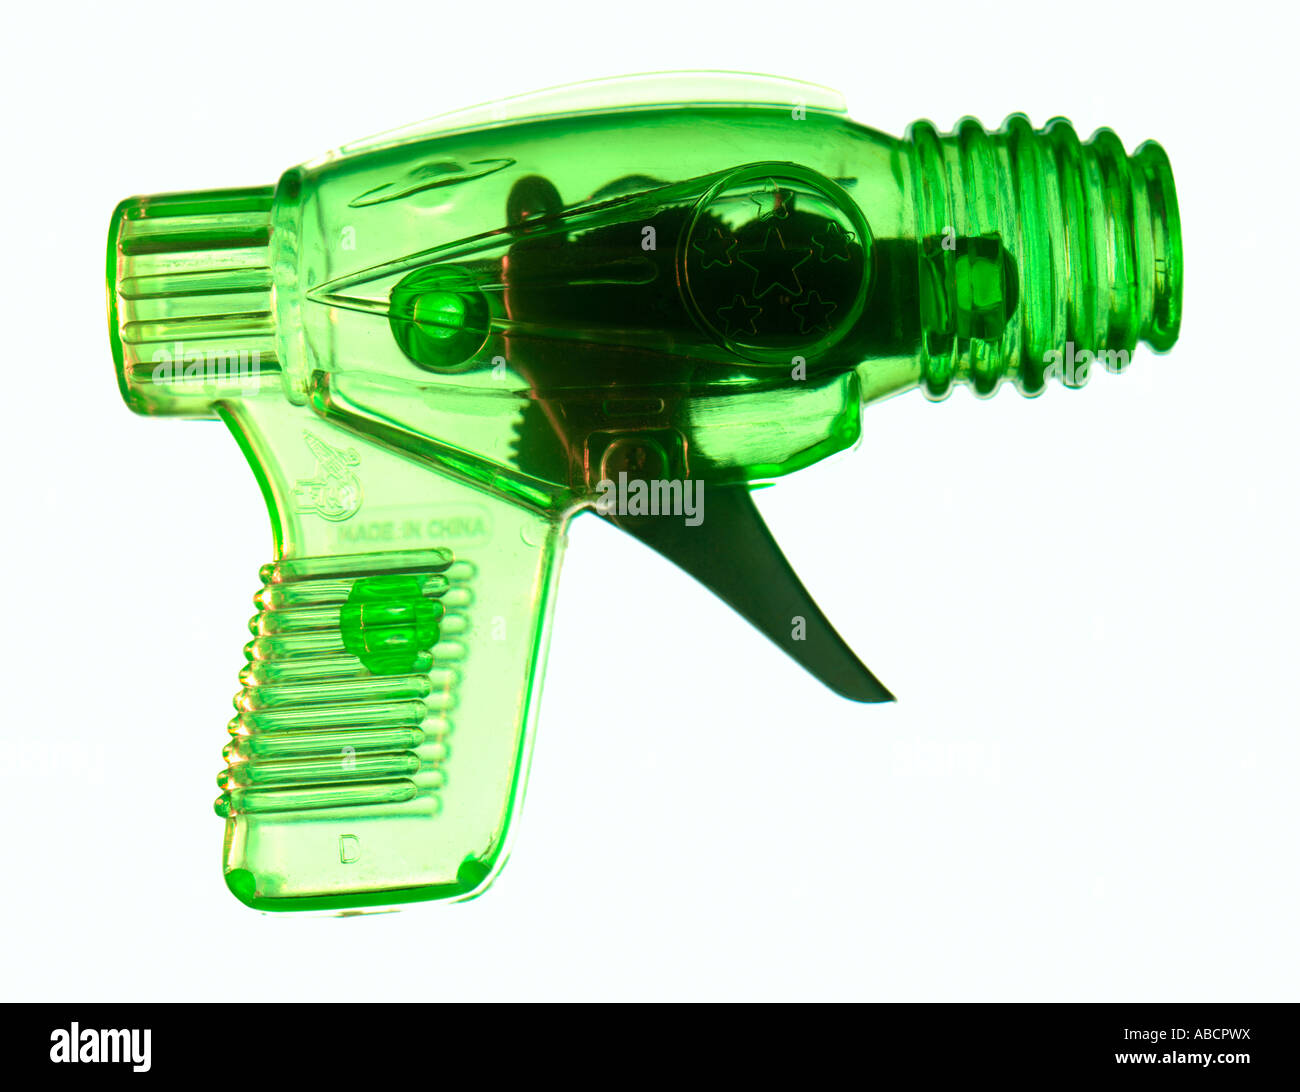 graphic illustrations of a toy gun for children Stock Photo